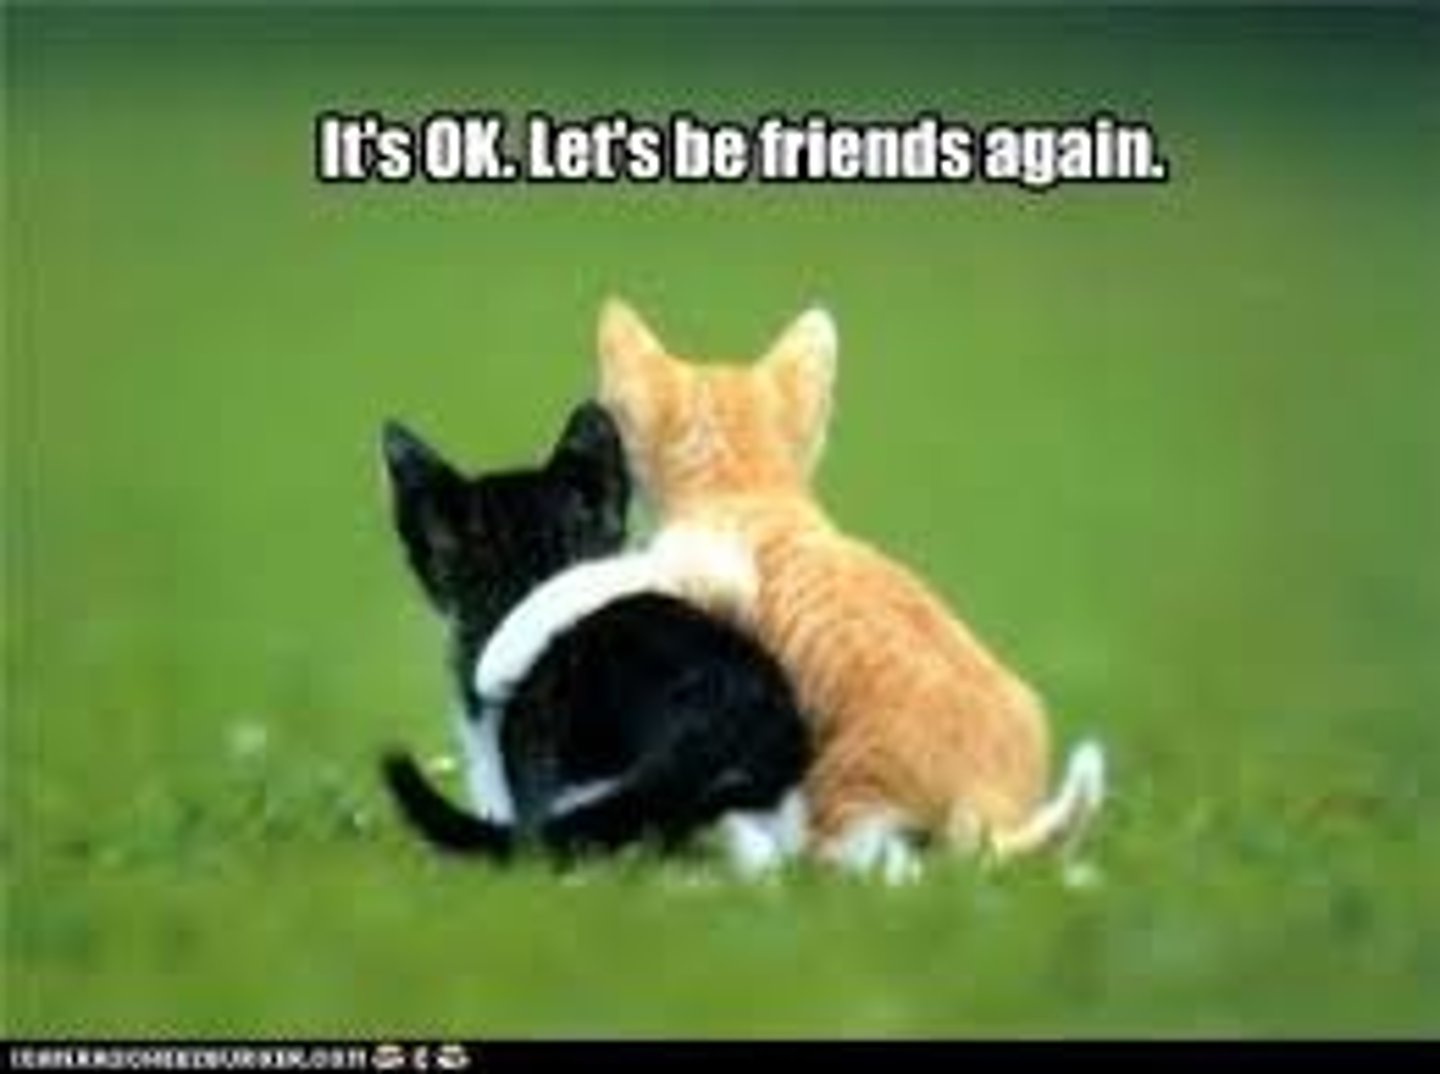 <p>to become friends again</p>